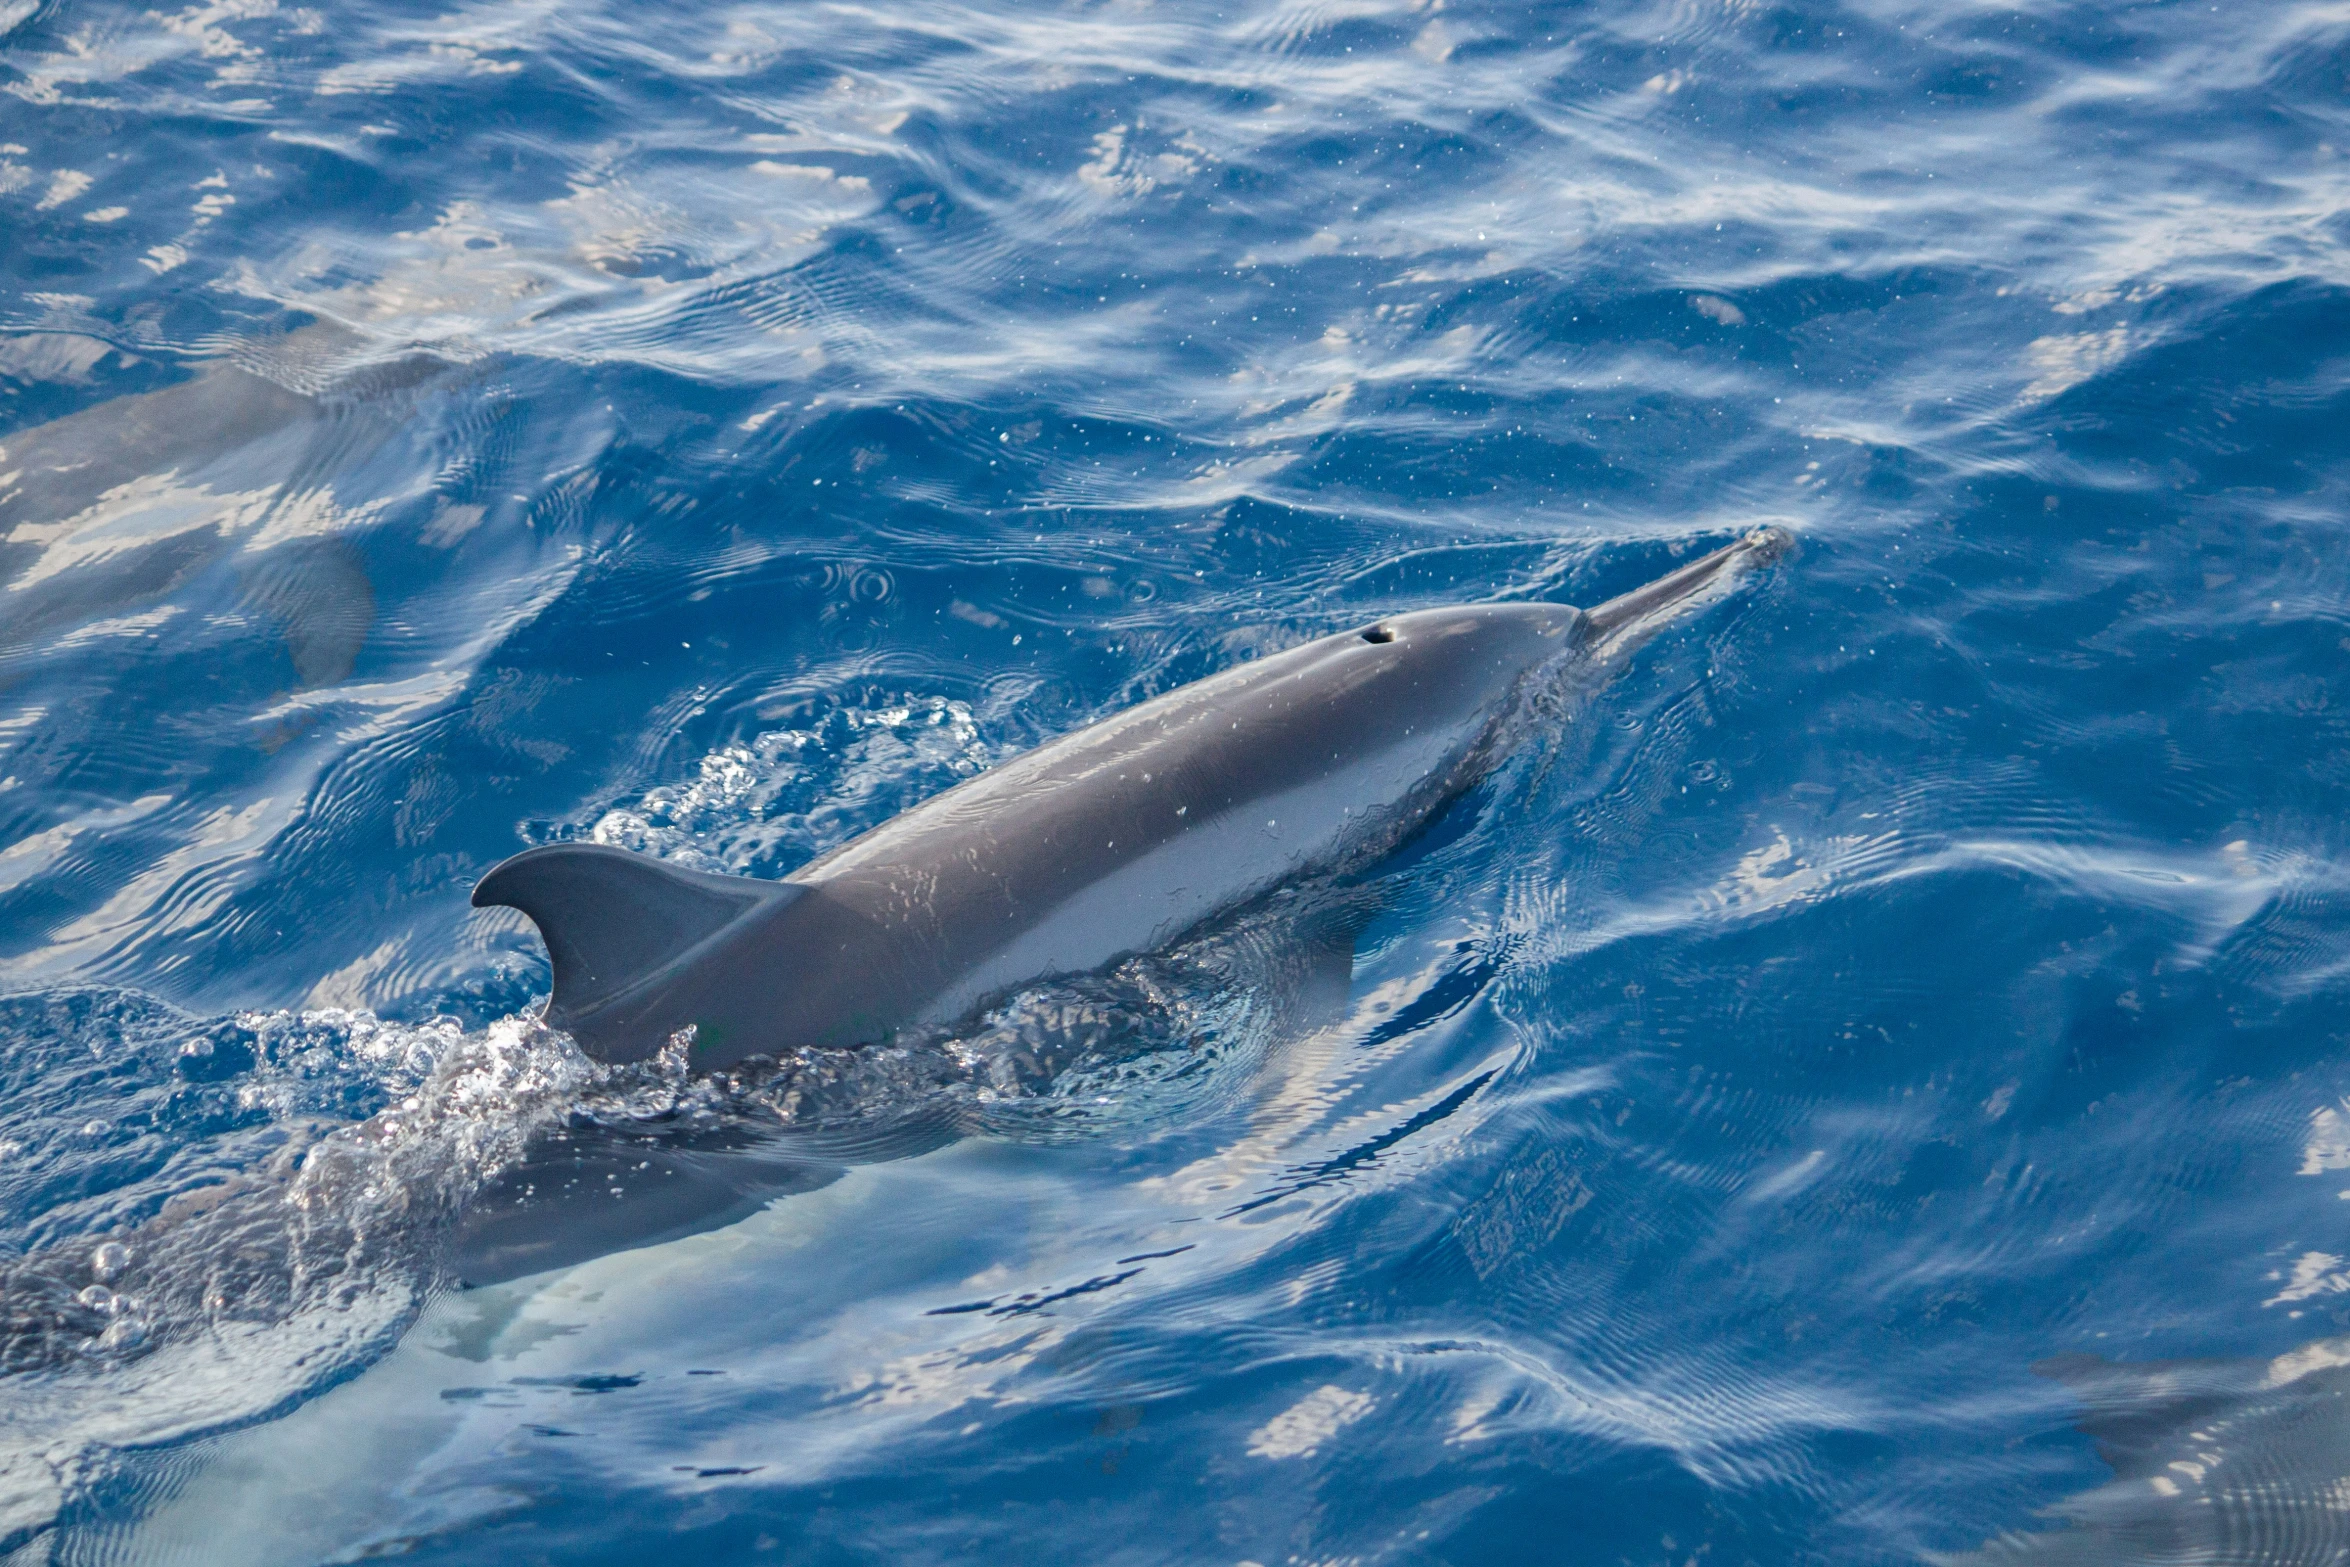 a dolphins tail is shown in the water